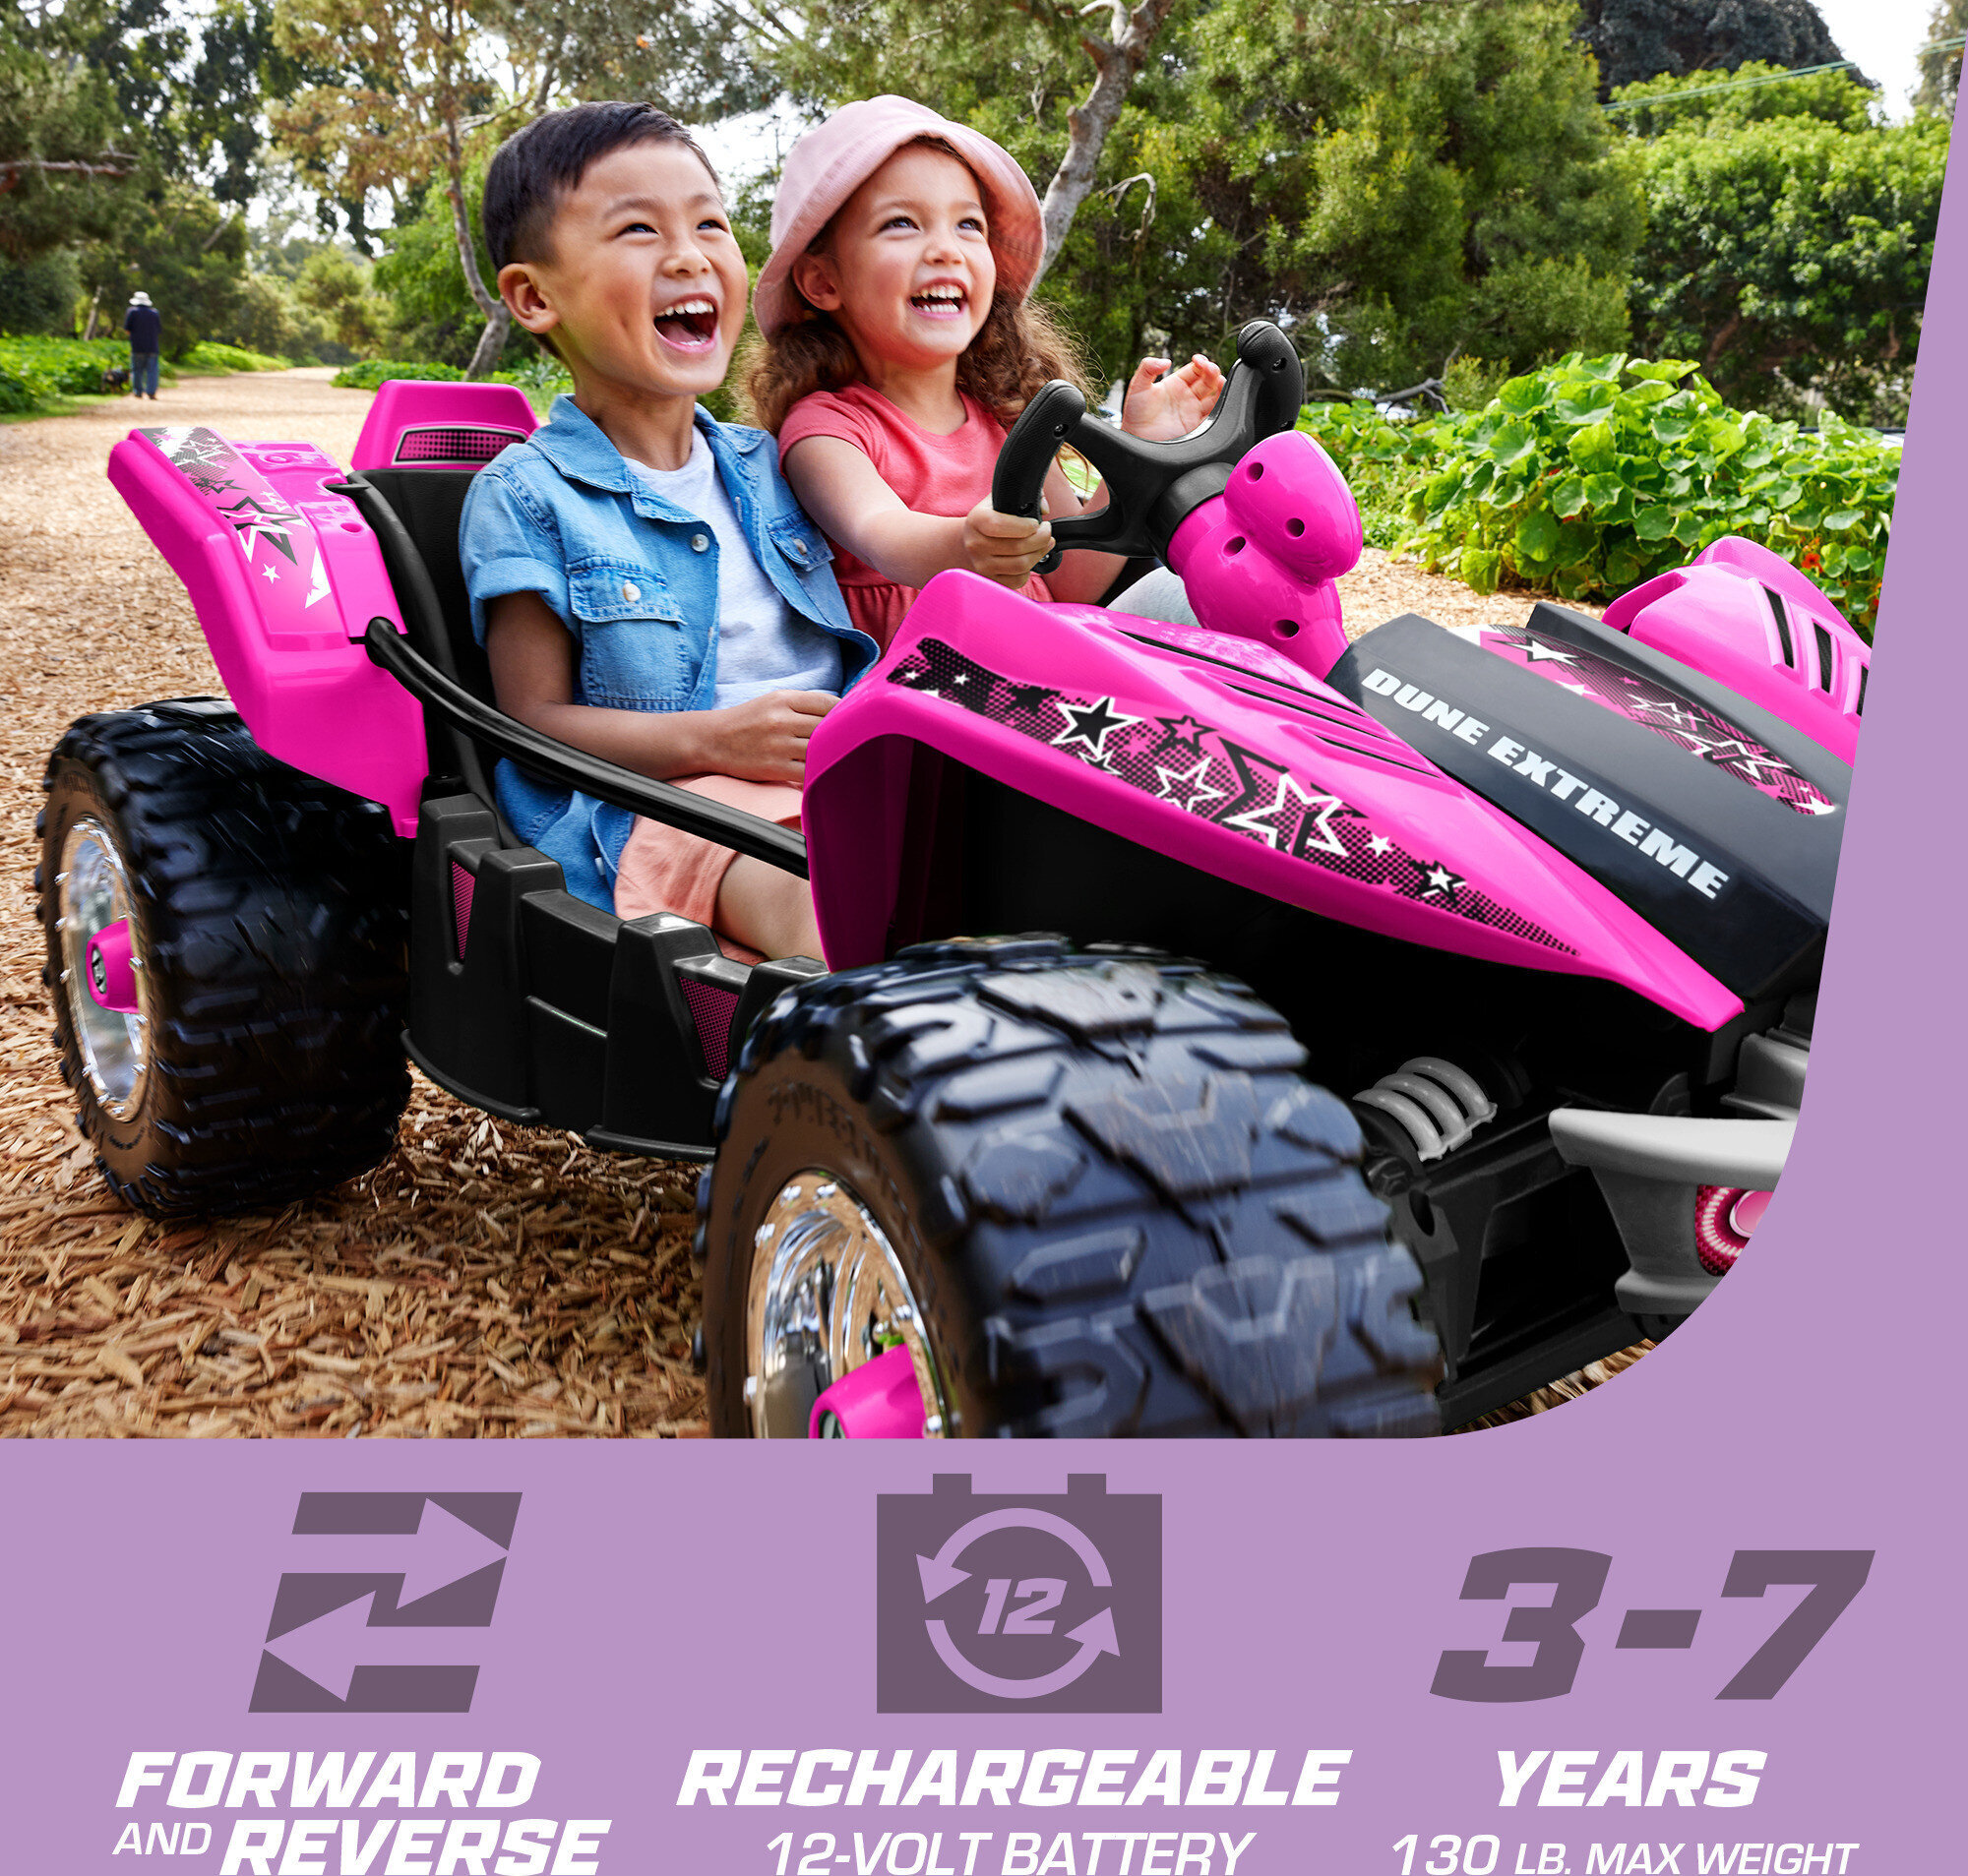 Power Wheels Dune Racer Extreme Battery-Powered Ride-on Vehicle with Charger, Pink, 12 V, Max Speed: 5 mph - image 3 of 7